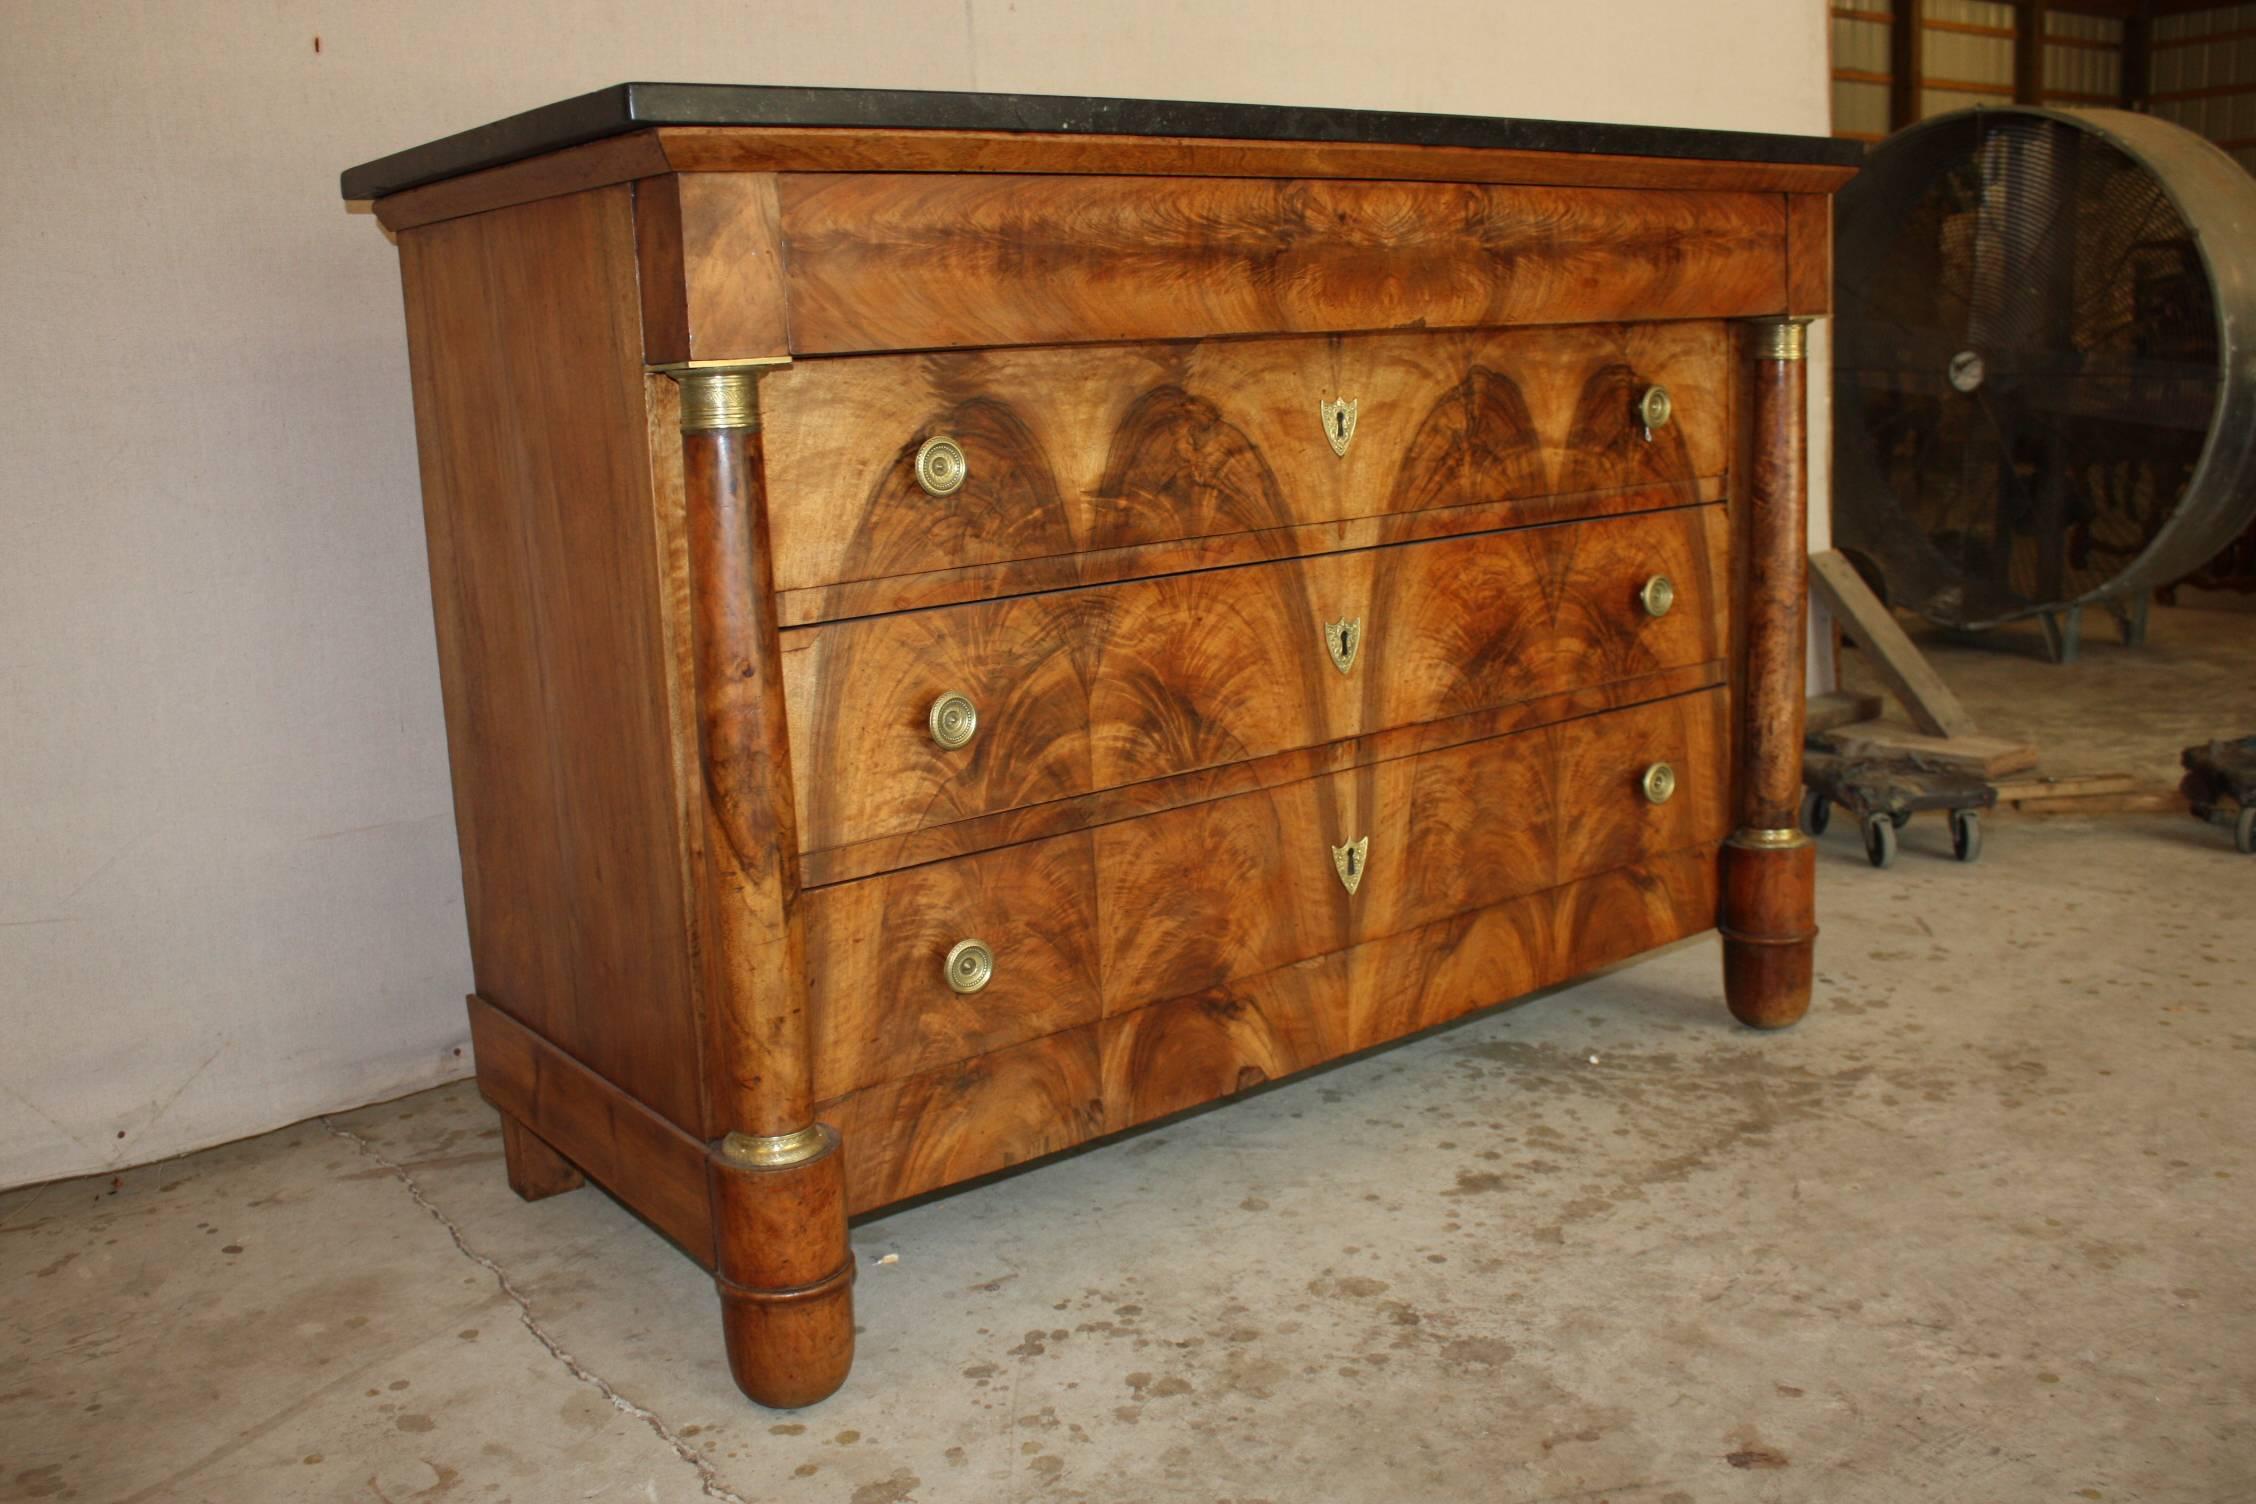 This Classic French Empire period commode features a gorgeous burl walnut facade and bronze ornaments on the columns framing the chest and a beautiful marble top. An absolutely stunning chest that will make a bold statement in your entry way,